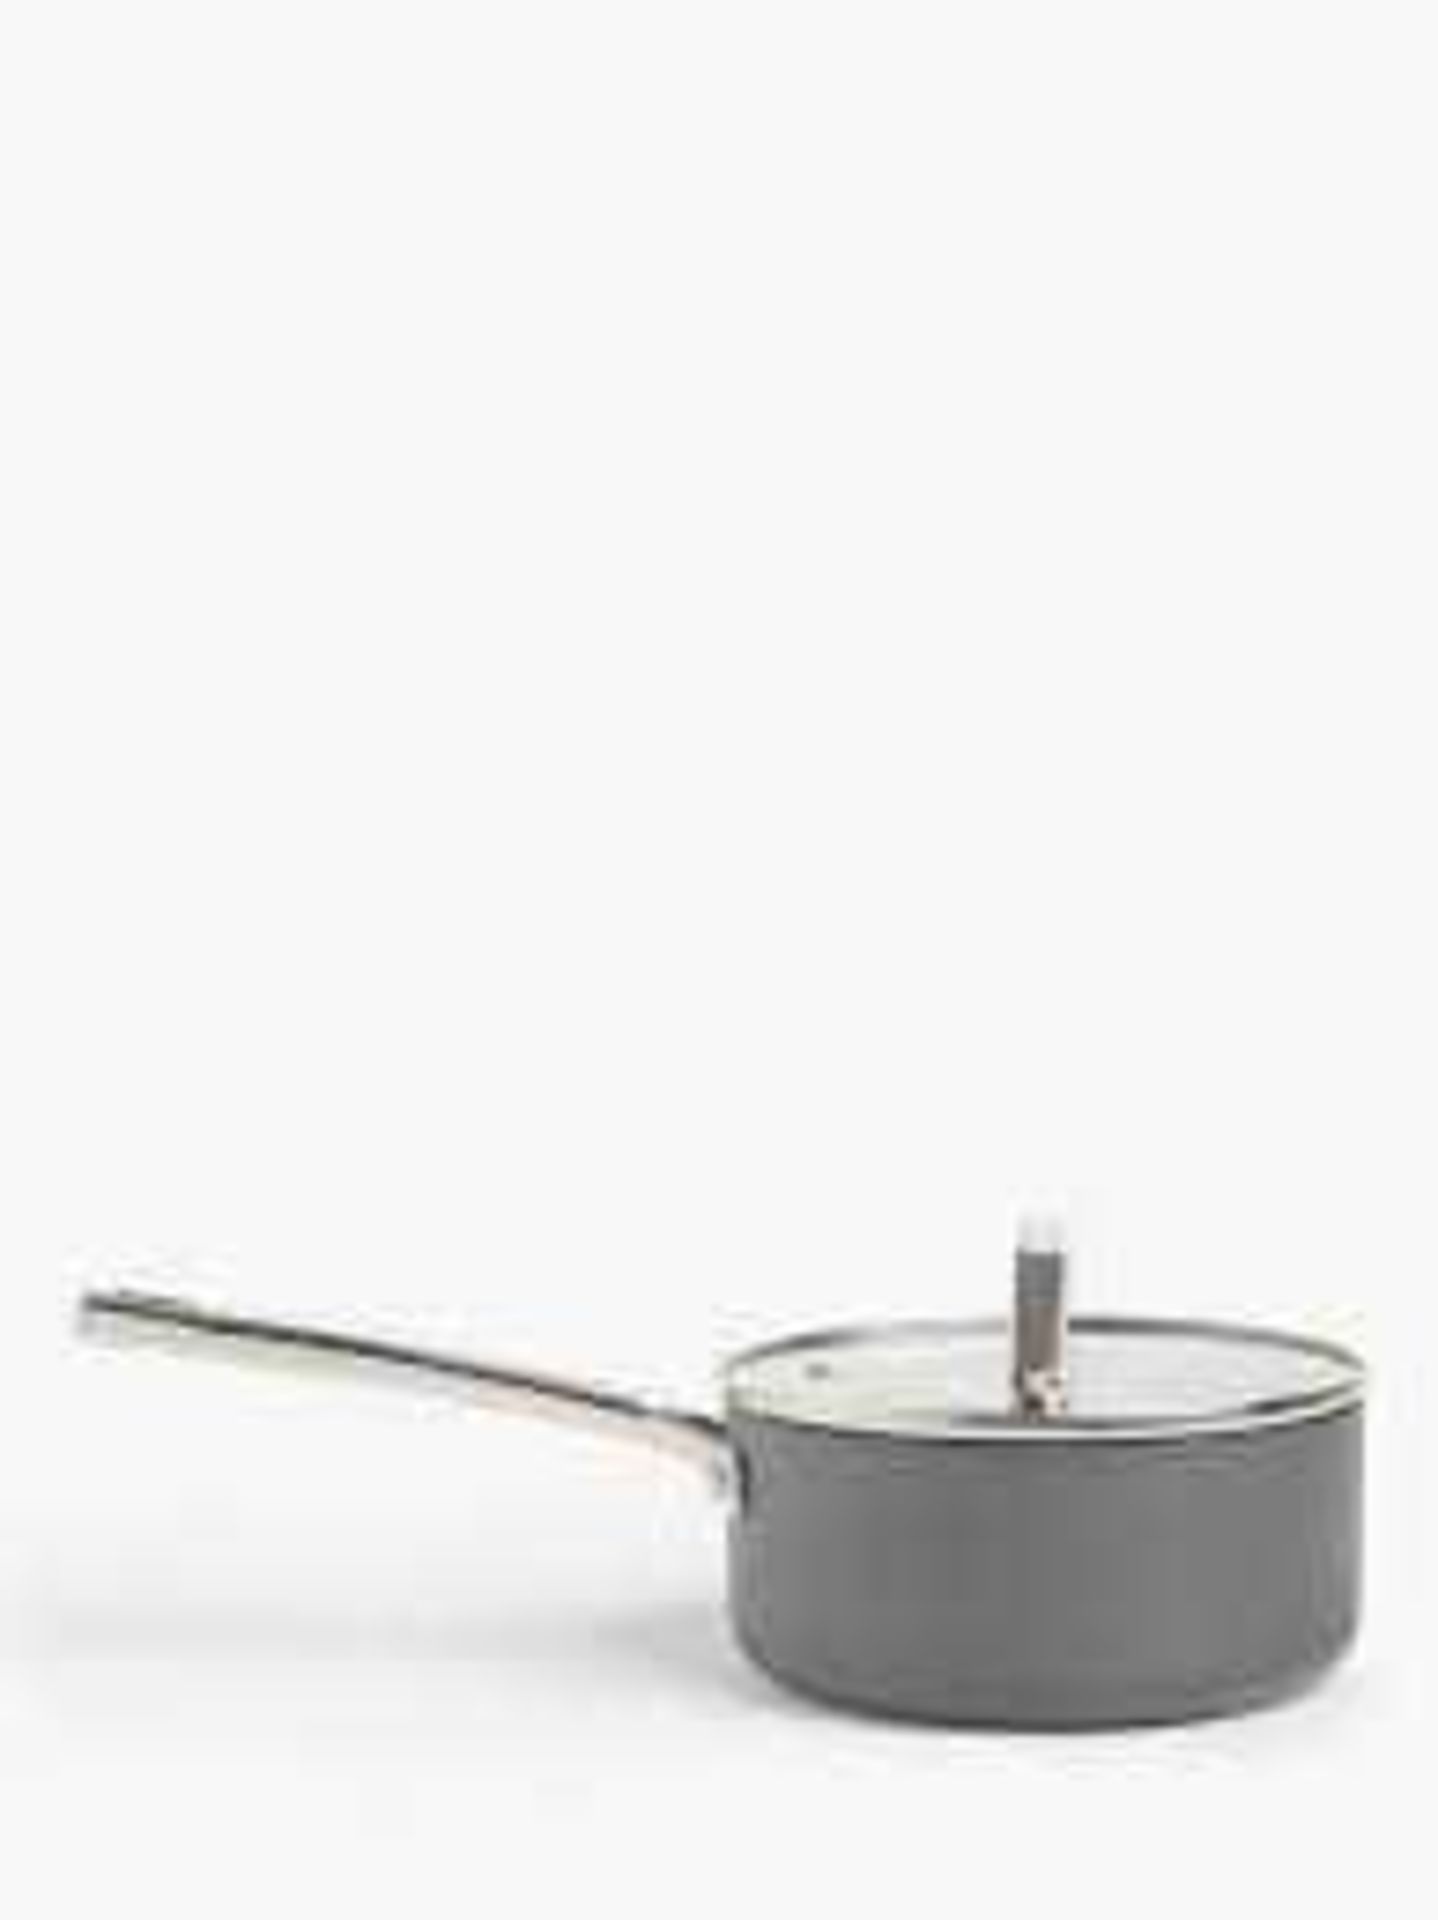 Combined RRP £120 Lot To Contain John Lewis Casserole Dish, Saucepan With Lid Large Tefal Frying Pan